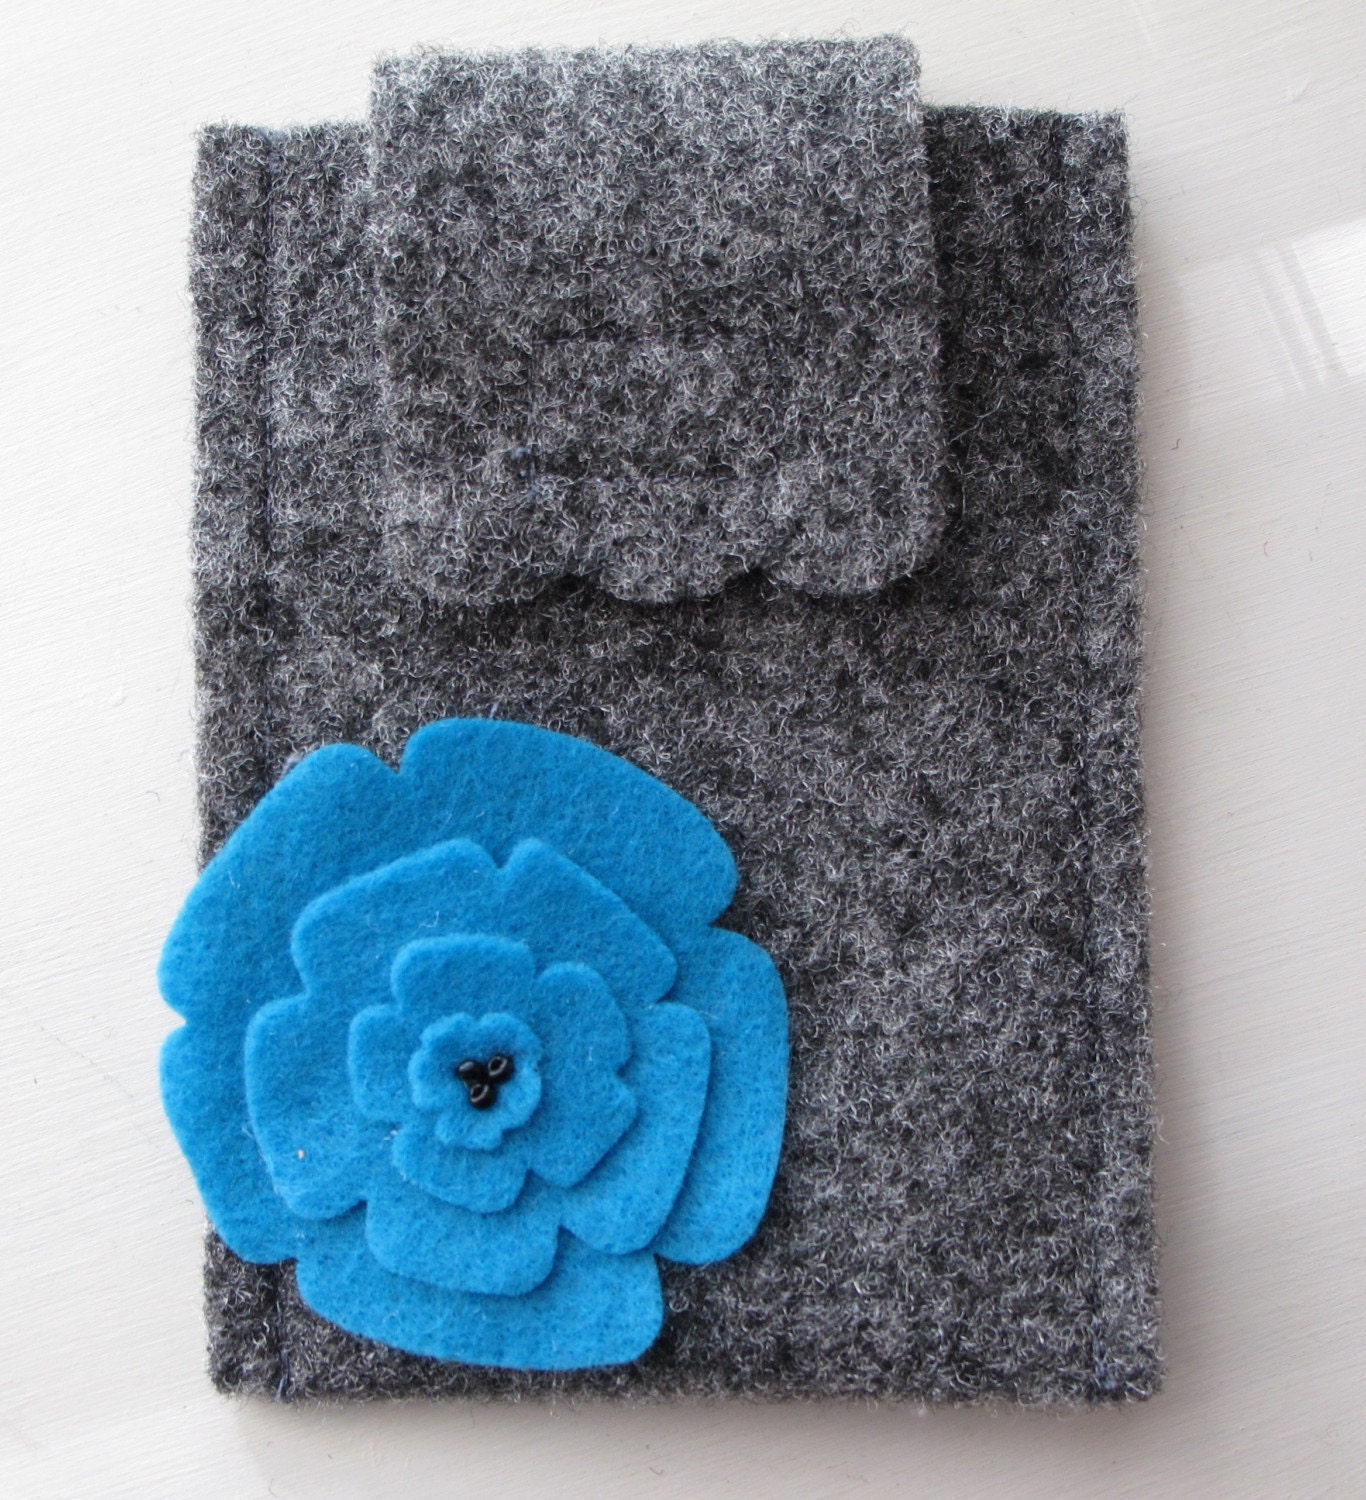 Grey Felt IPhone Cell Phone Camera Gadget Case with Turquoise Felt Flower